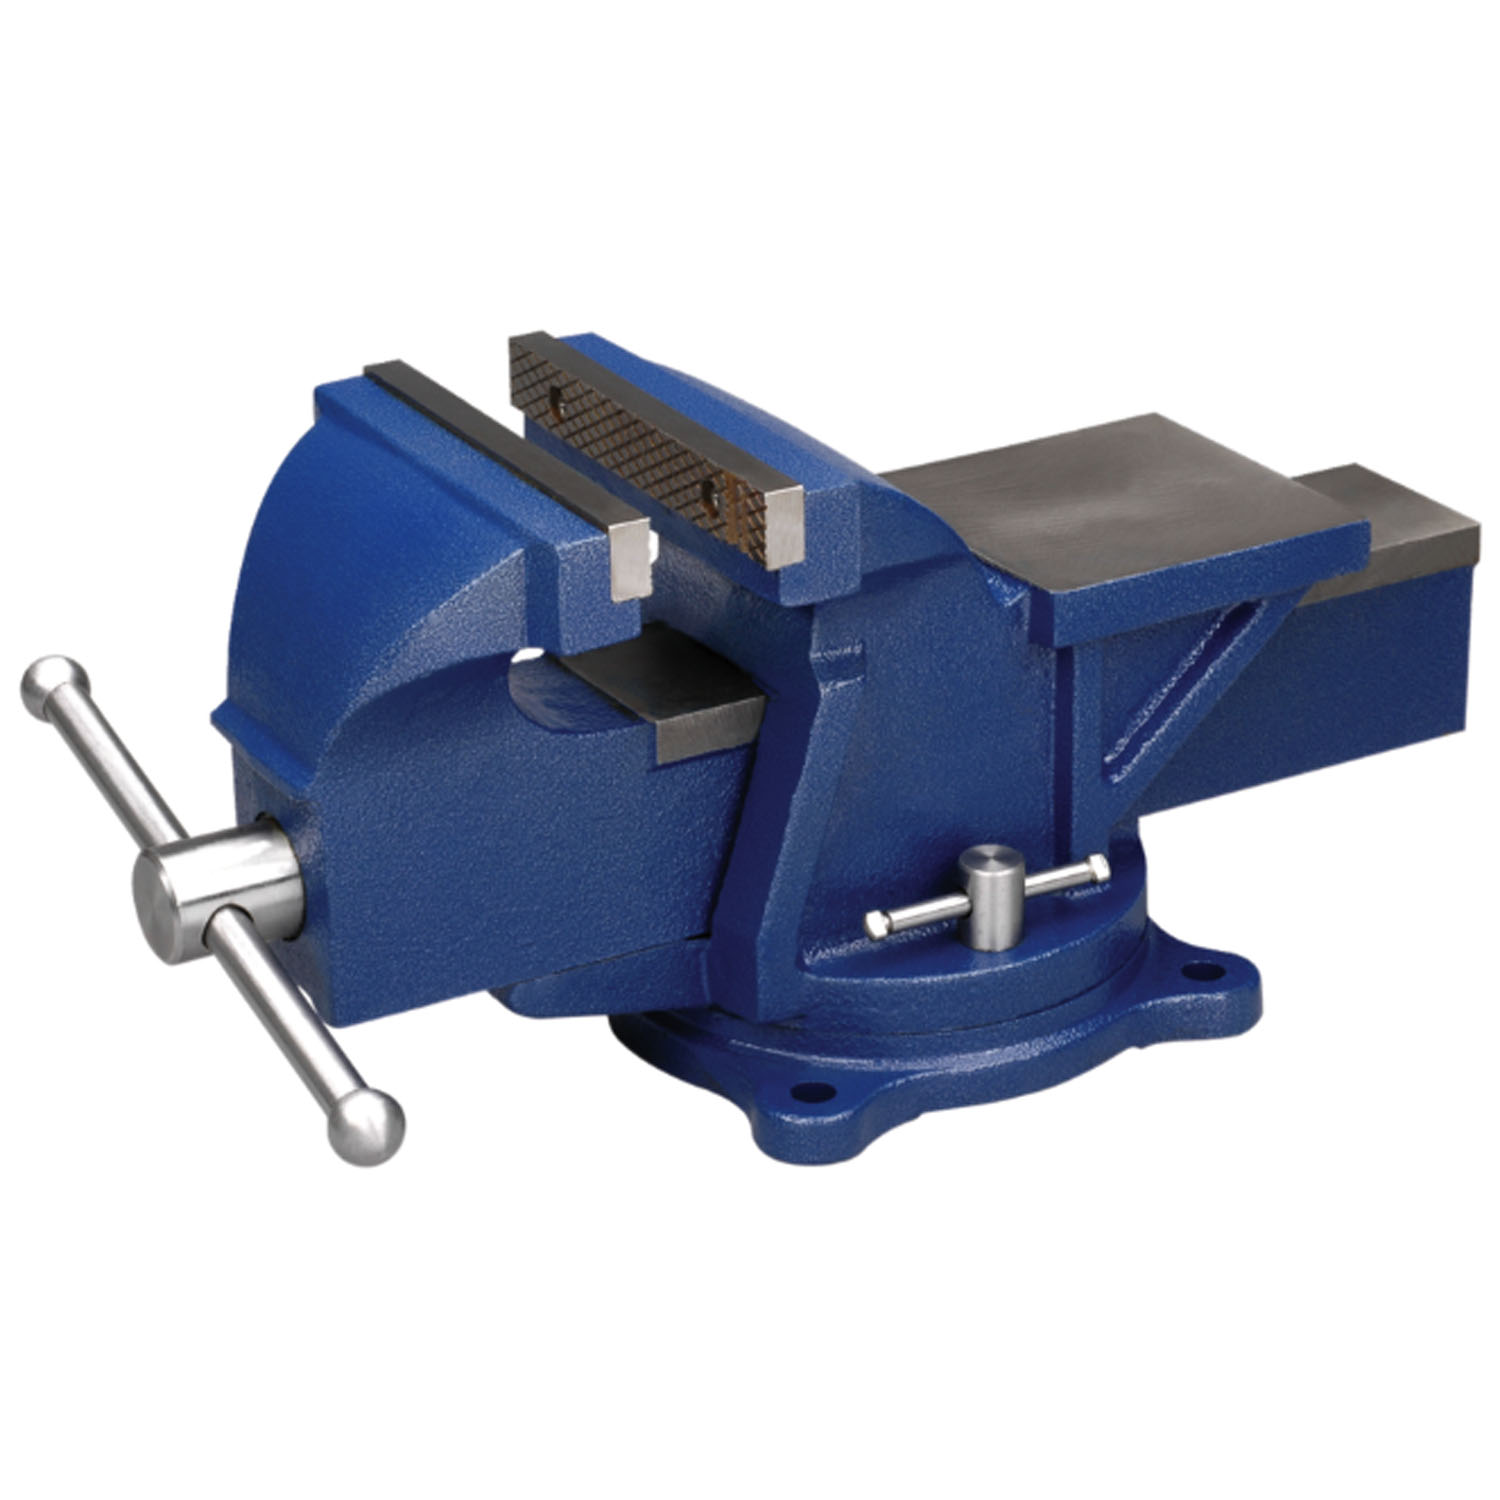 GENERAL PURPOSE 5 IN. JAW BENCH VISE WITH SWIVEL BASE